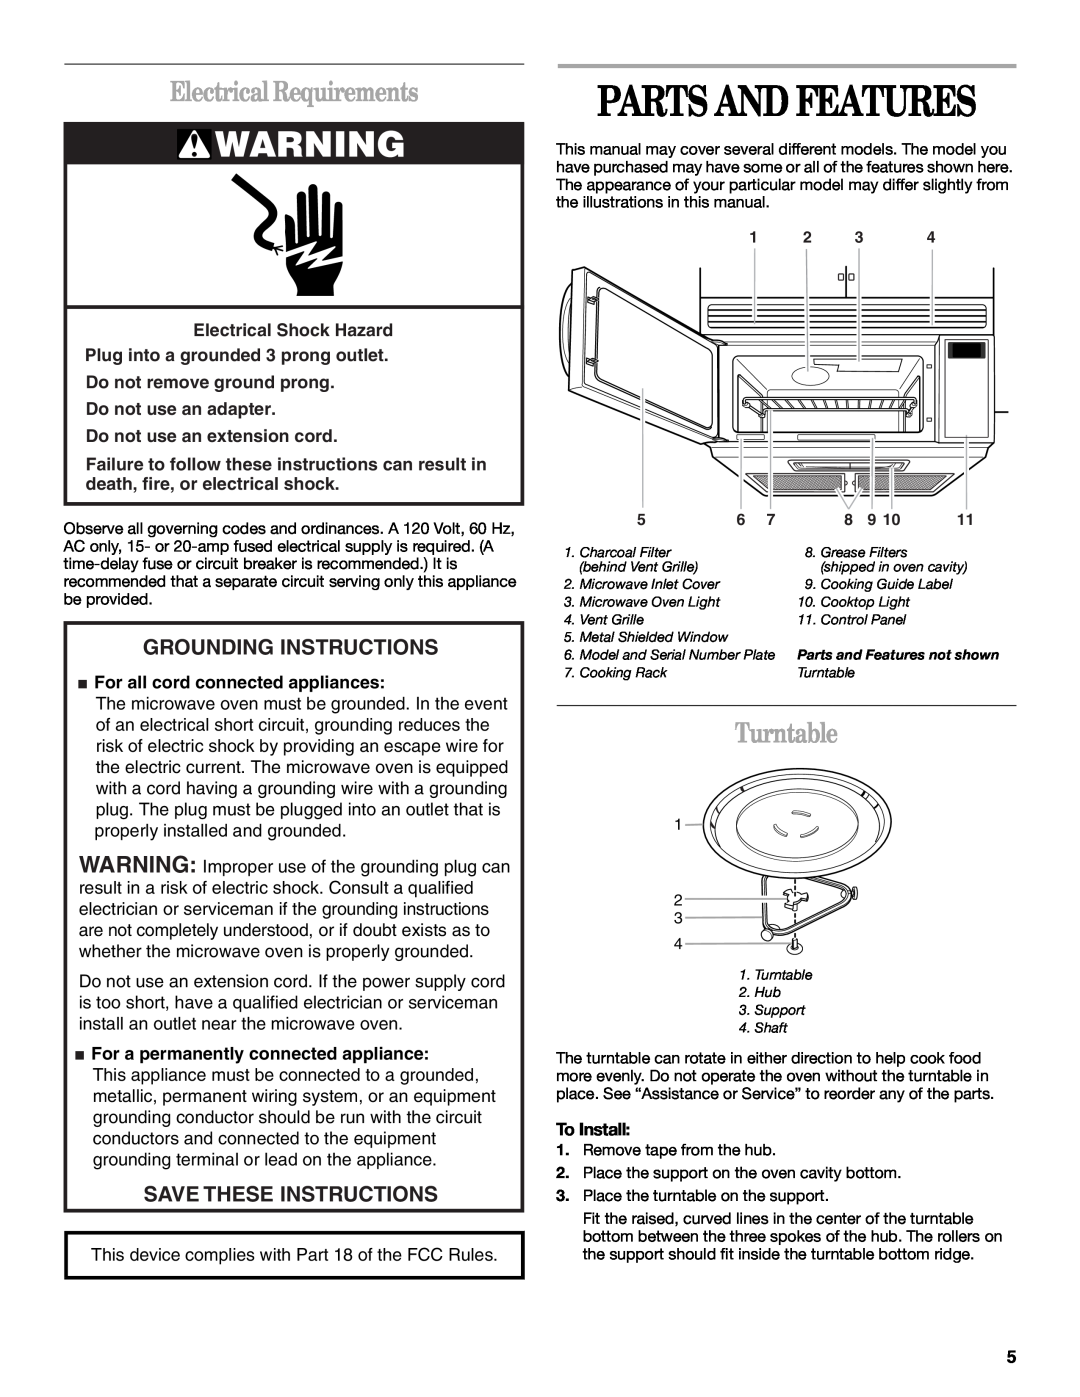 United Appliances YMH1150XM Parts And Features, Electrical Requirements, Turntable, Grounding Instructions, To Install 